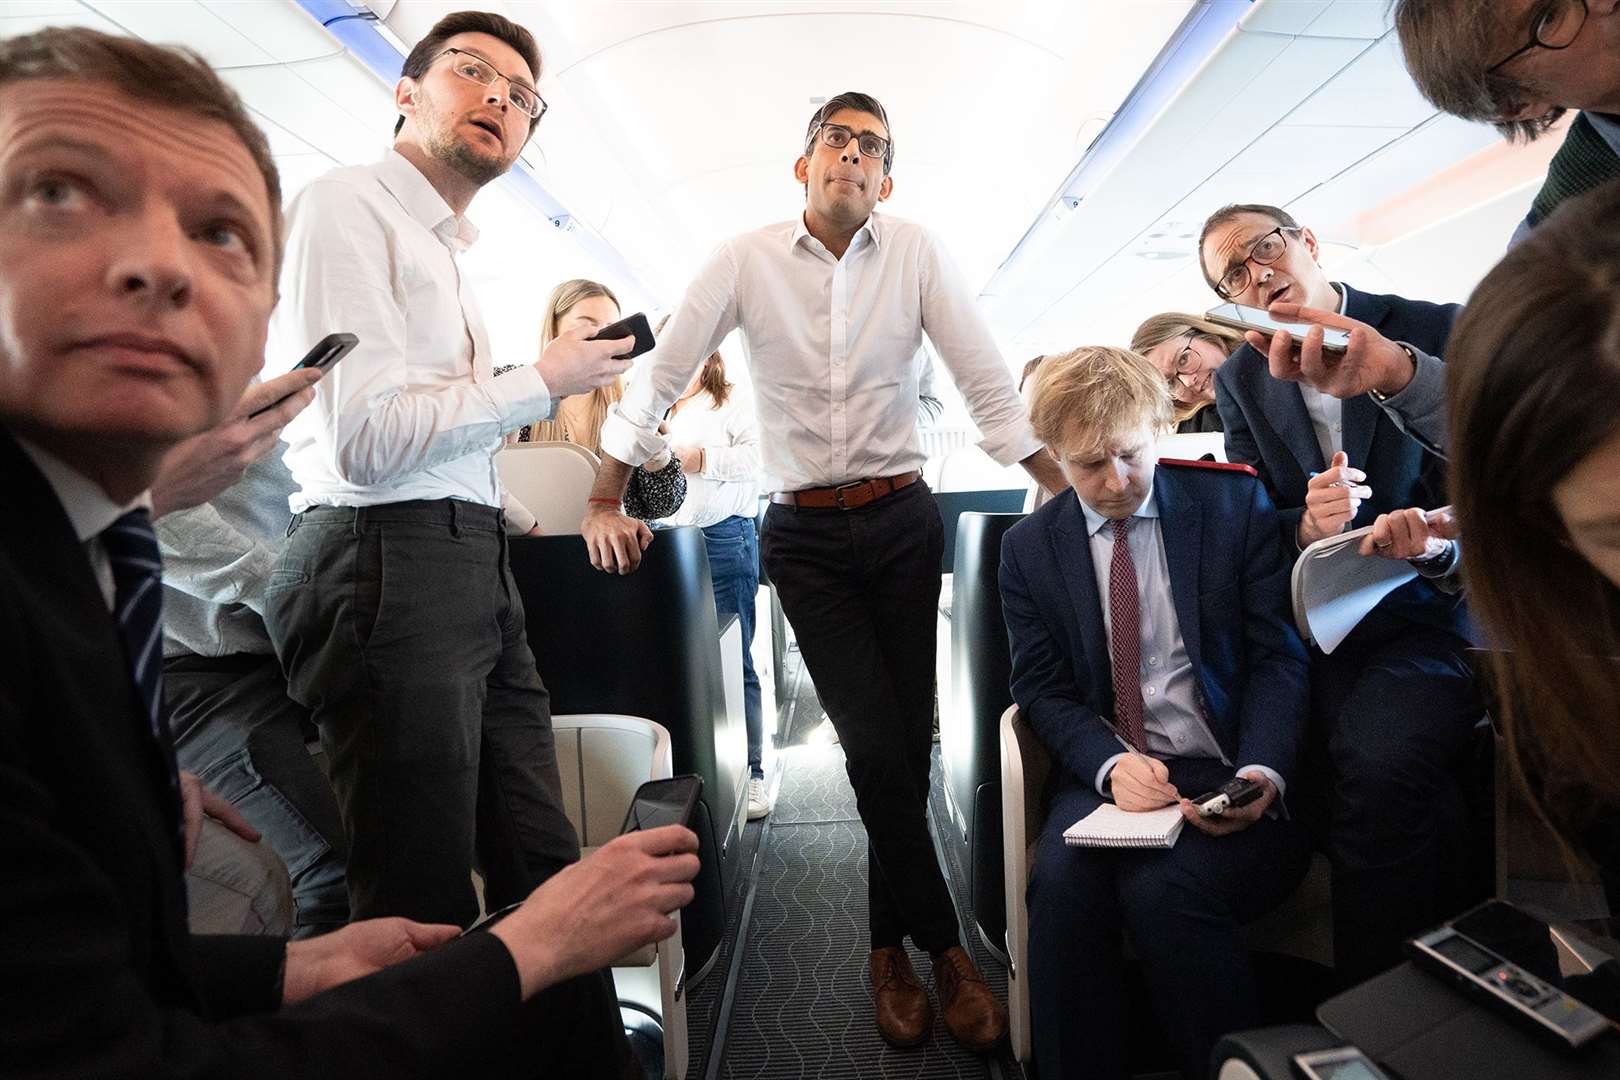 Prime Minister Rishi Sunak speaks to members of the travelling media during his flight to San Diego (Stefan Rousseau/PA)